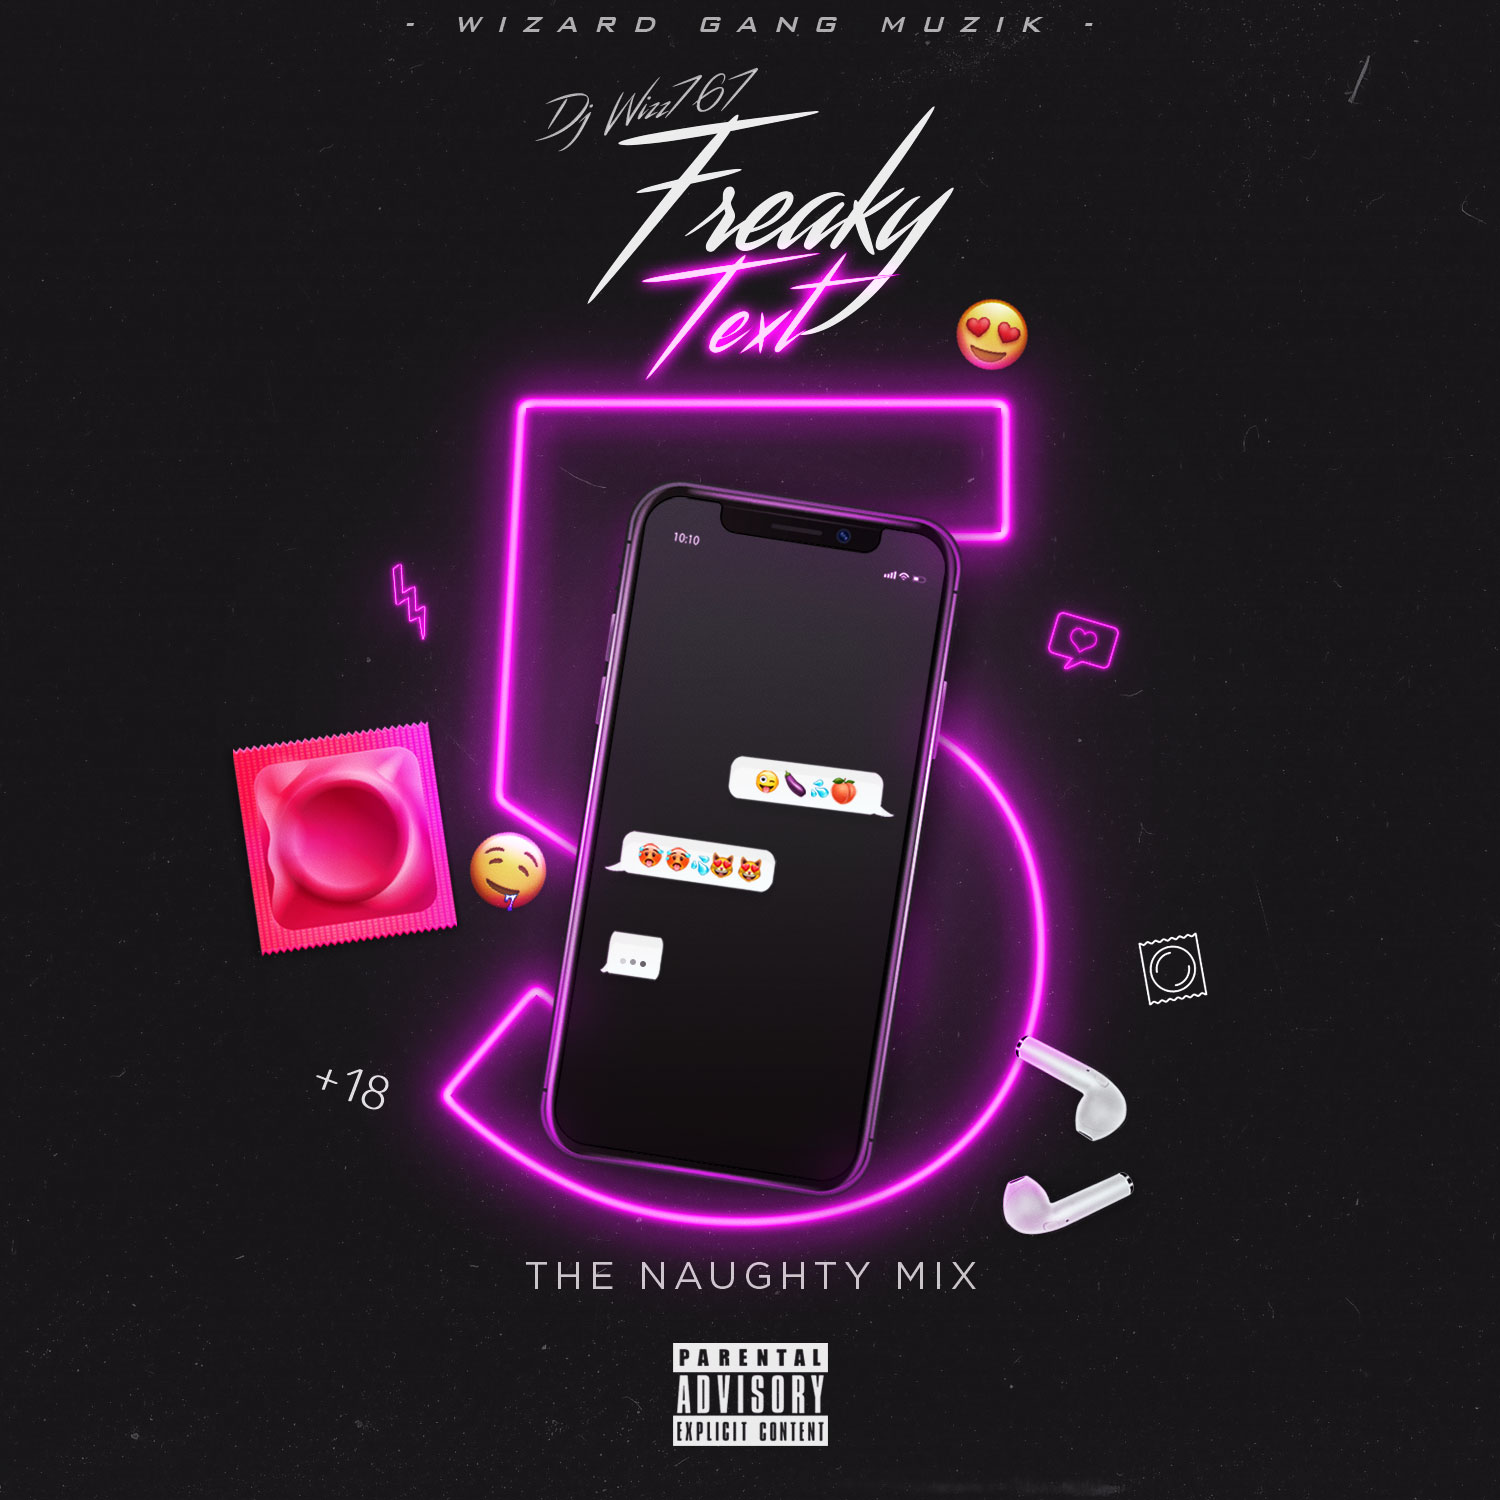 Read more about the article Dj Wizz767 – FREAKY TEXT 5 (THE NAUGHTY MIX)